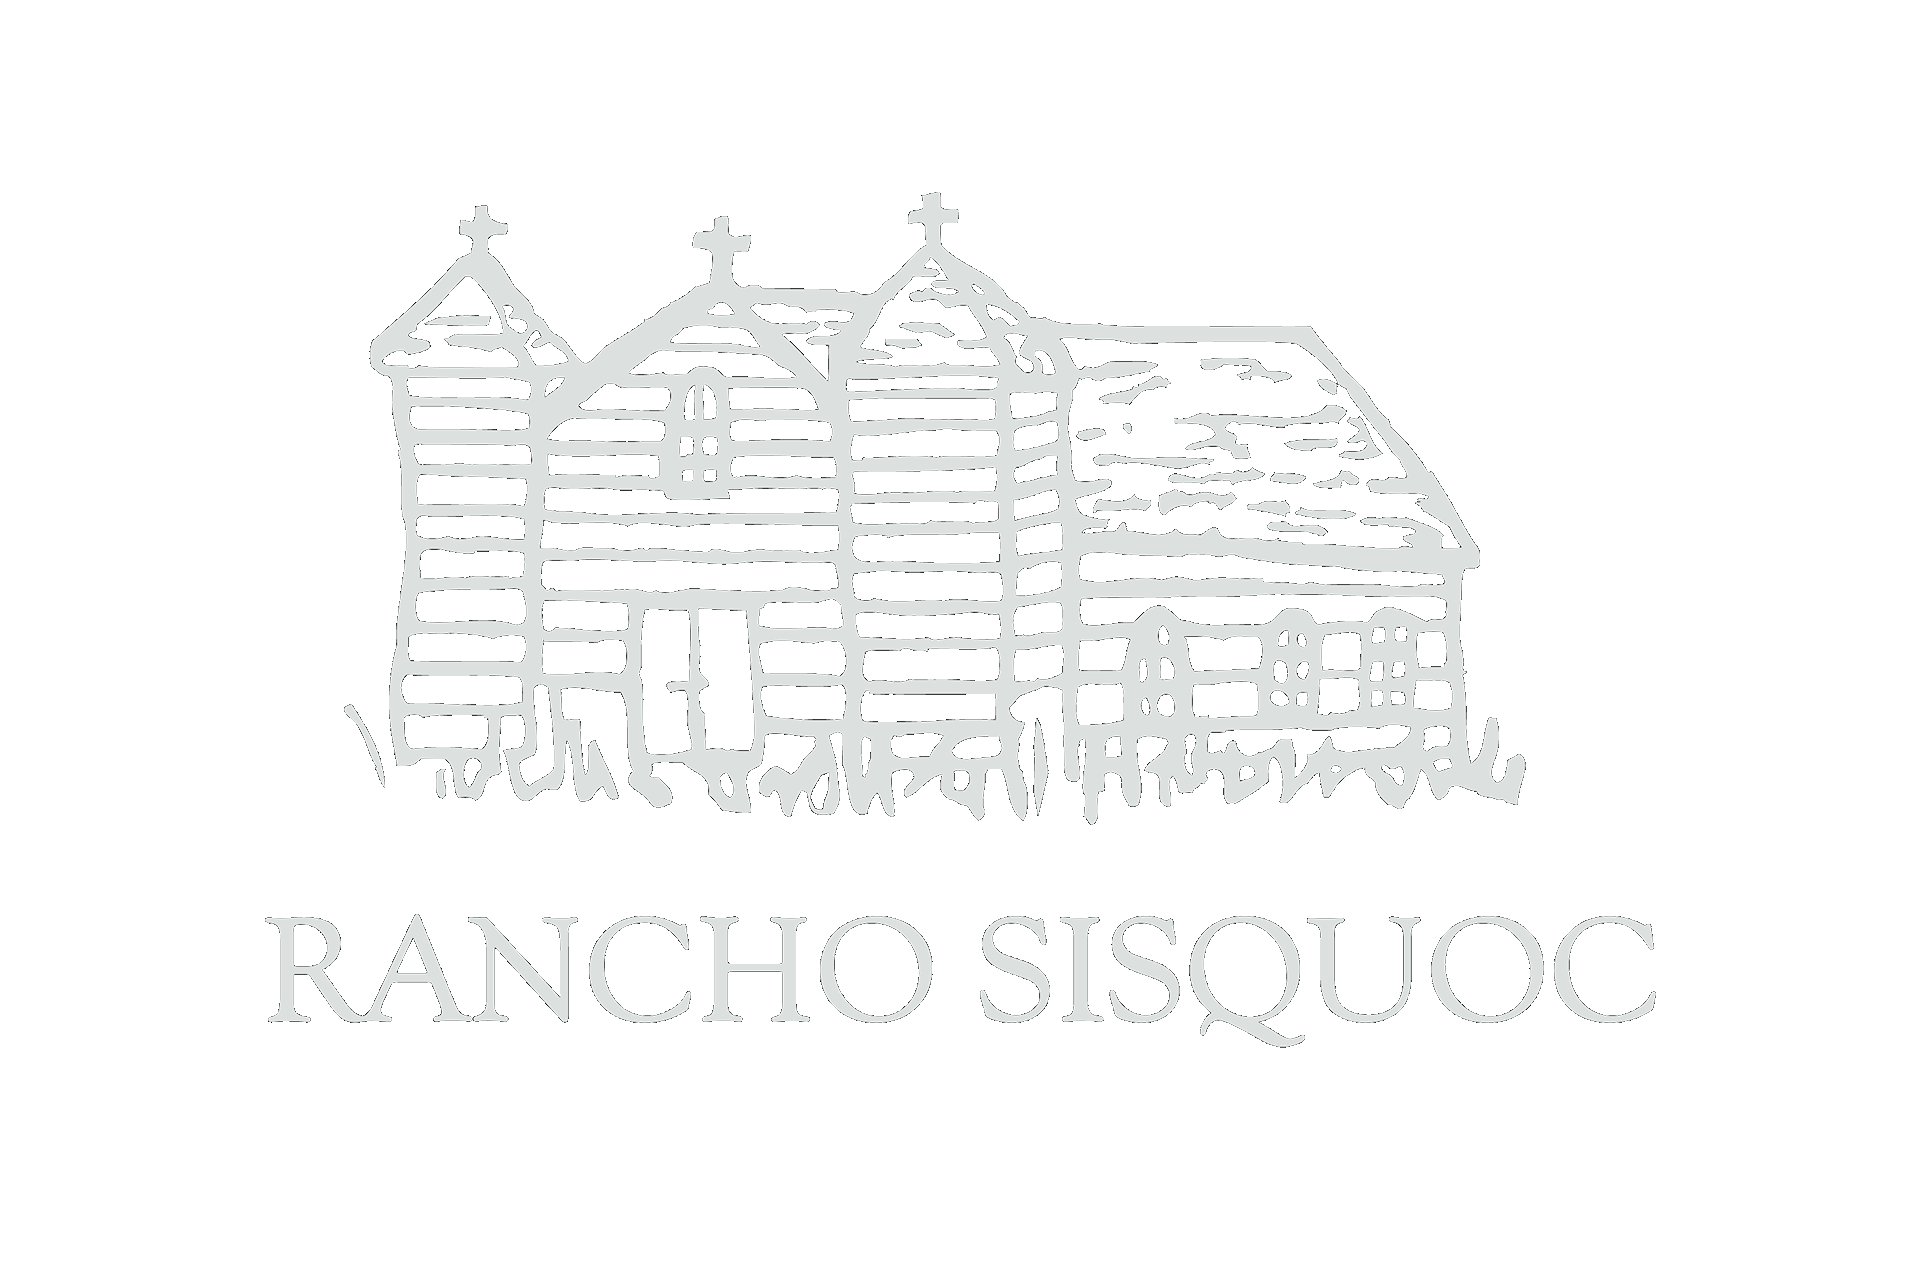 Rancho Sisquoc Winery Scrolled light version of the logo (Link to homepage)